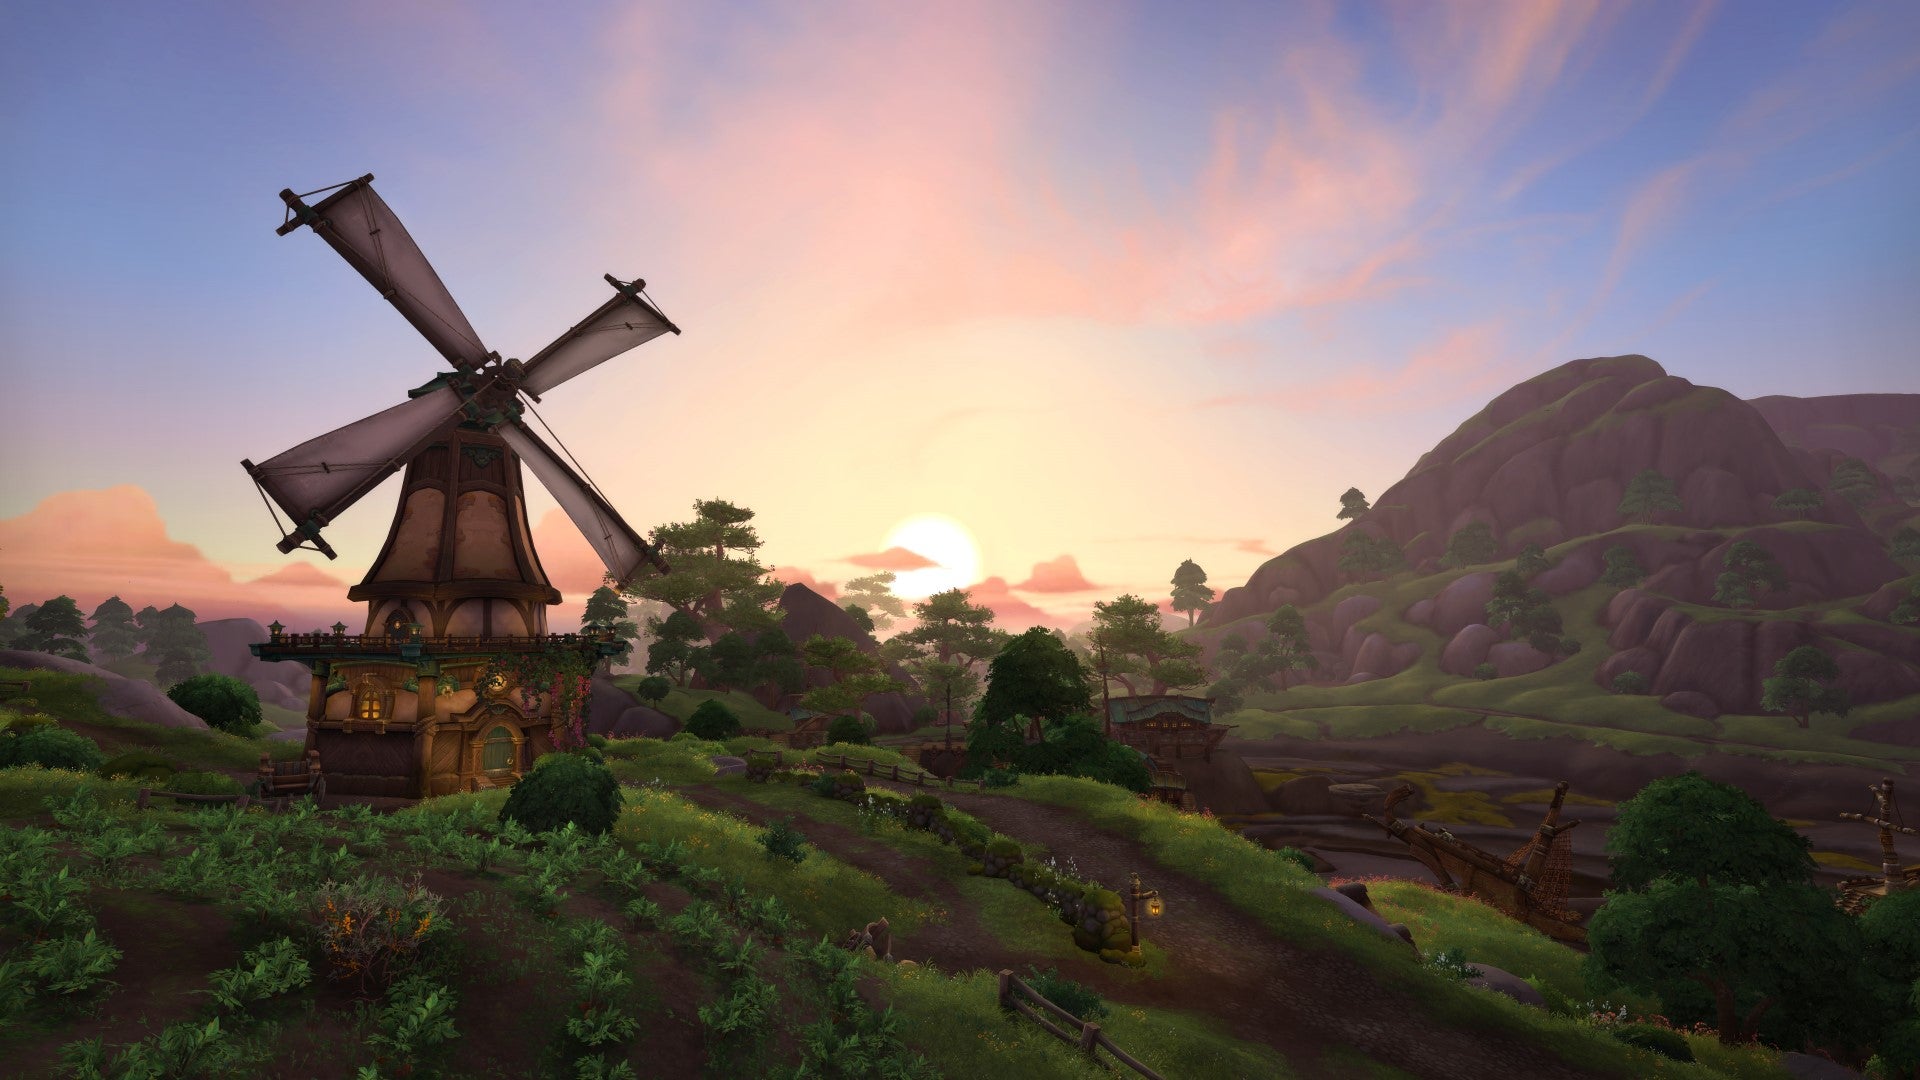 A vista of Stormsong from World Of Warcraft, with lovely rolling hills and a windmill.